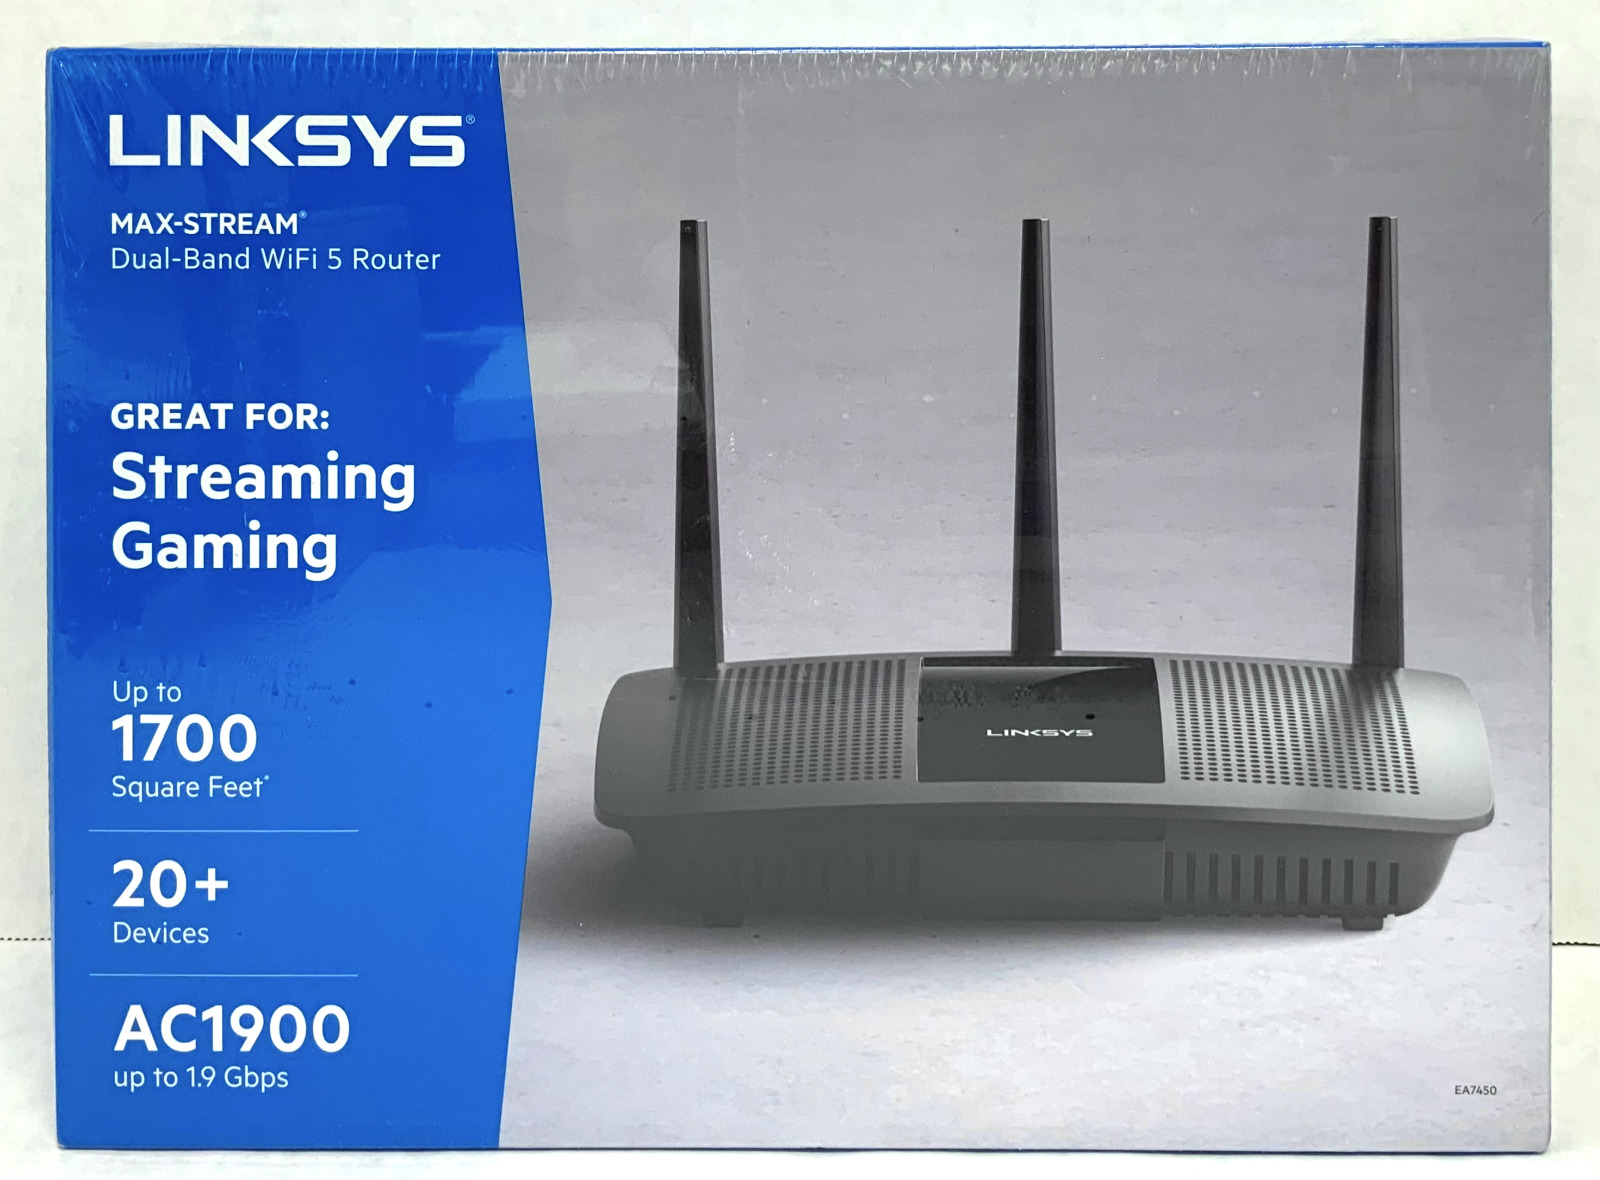 NEW Linksys R74 EA7450 Max-Stream AC1900 Wireless Dual-Band Gigabit Router